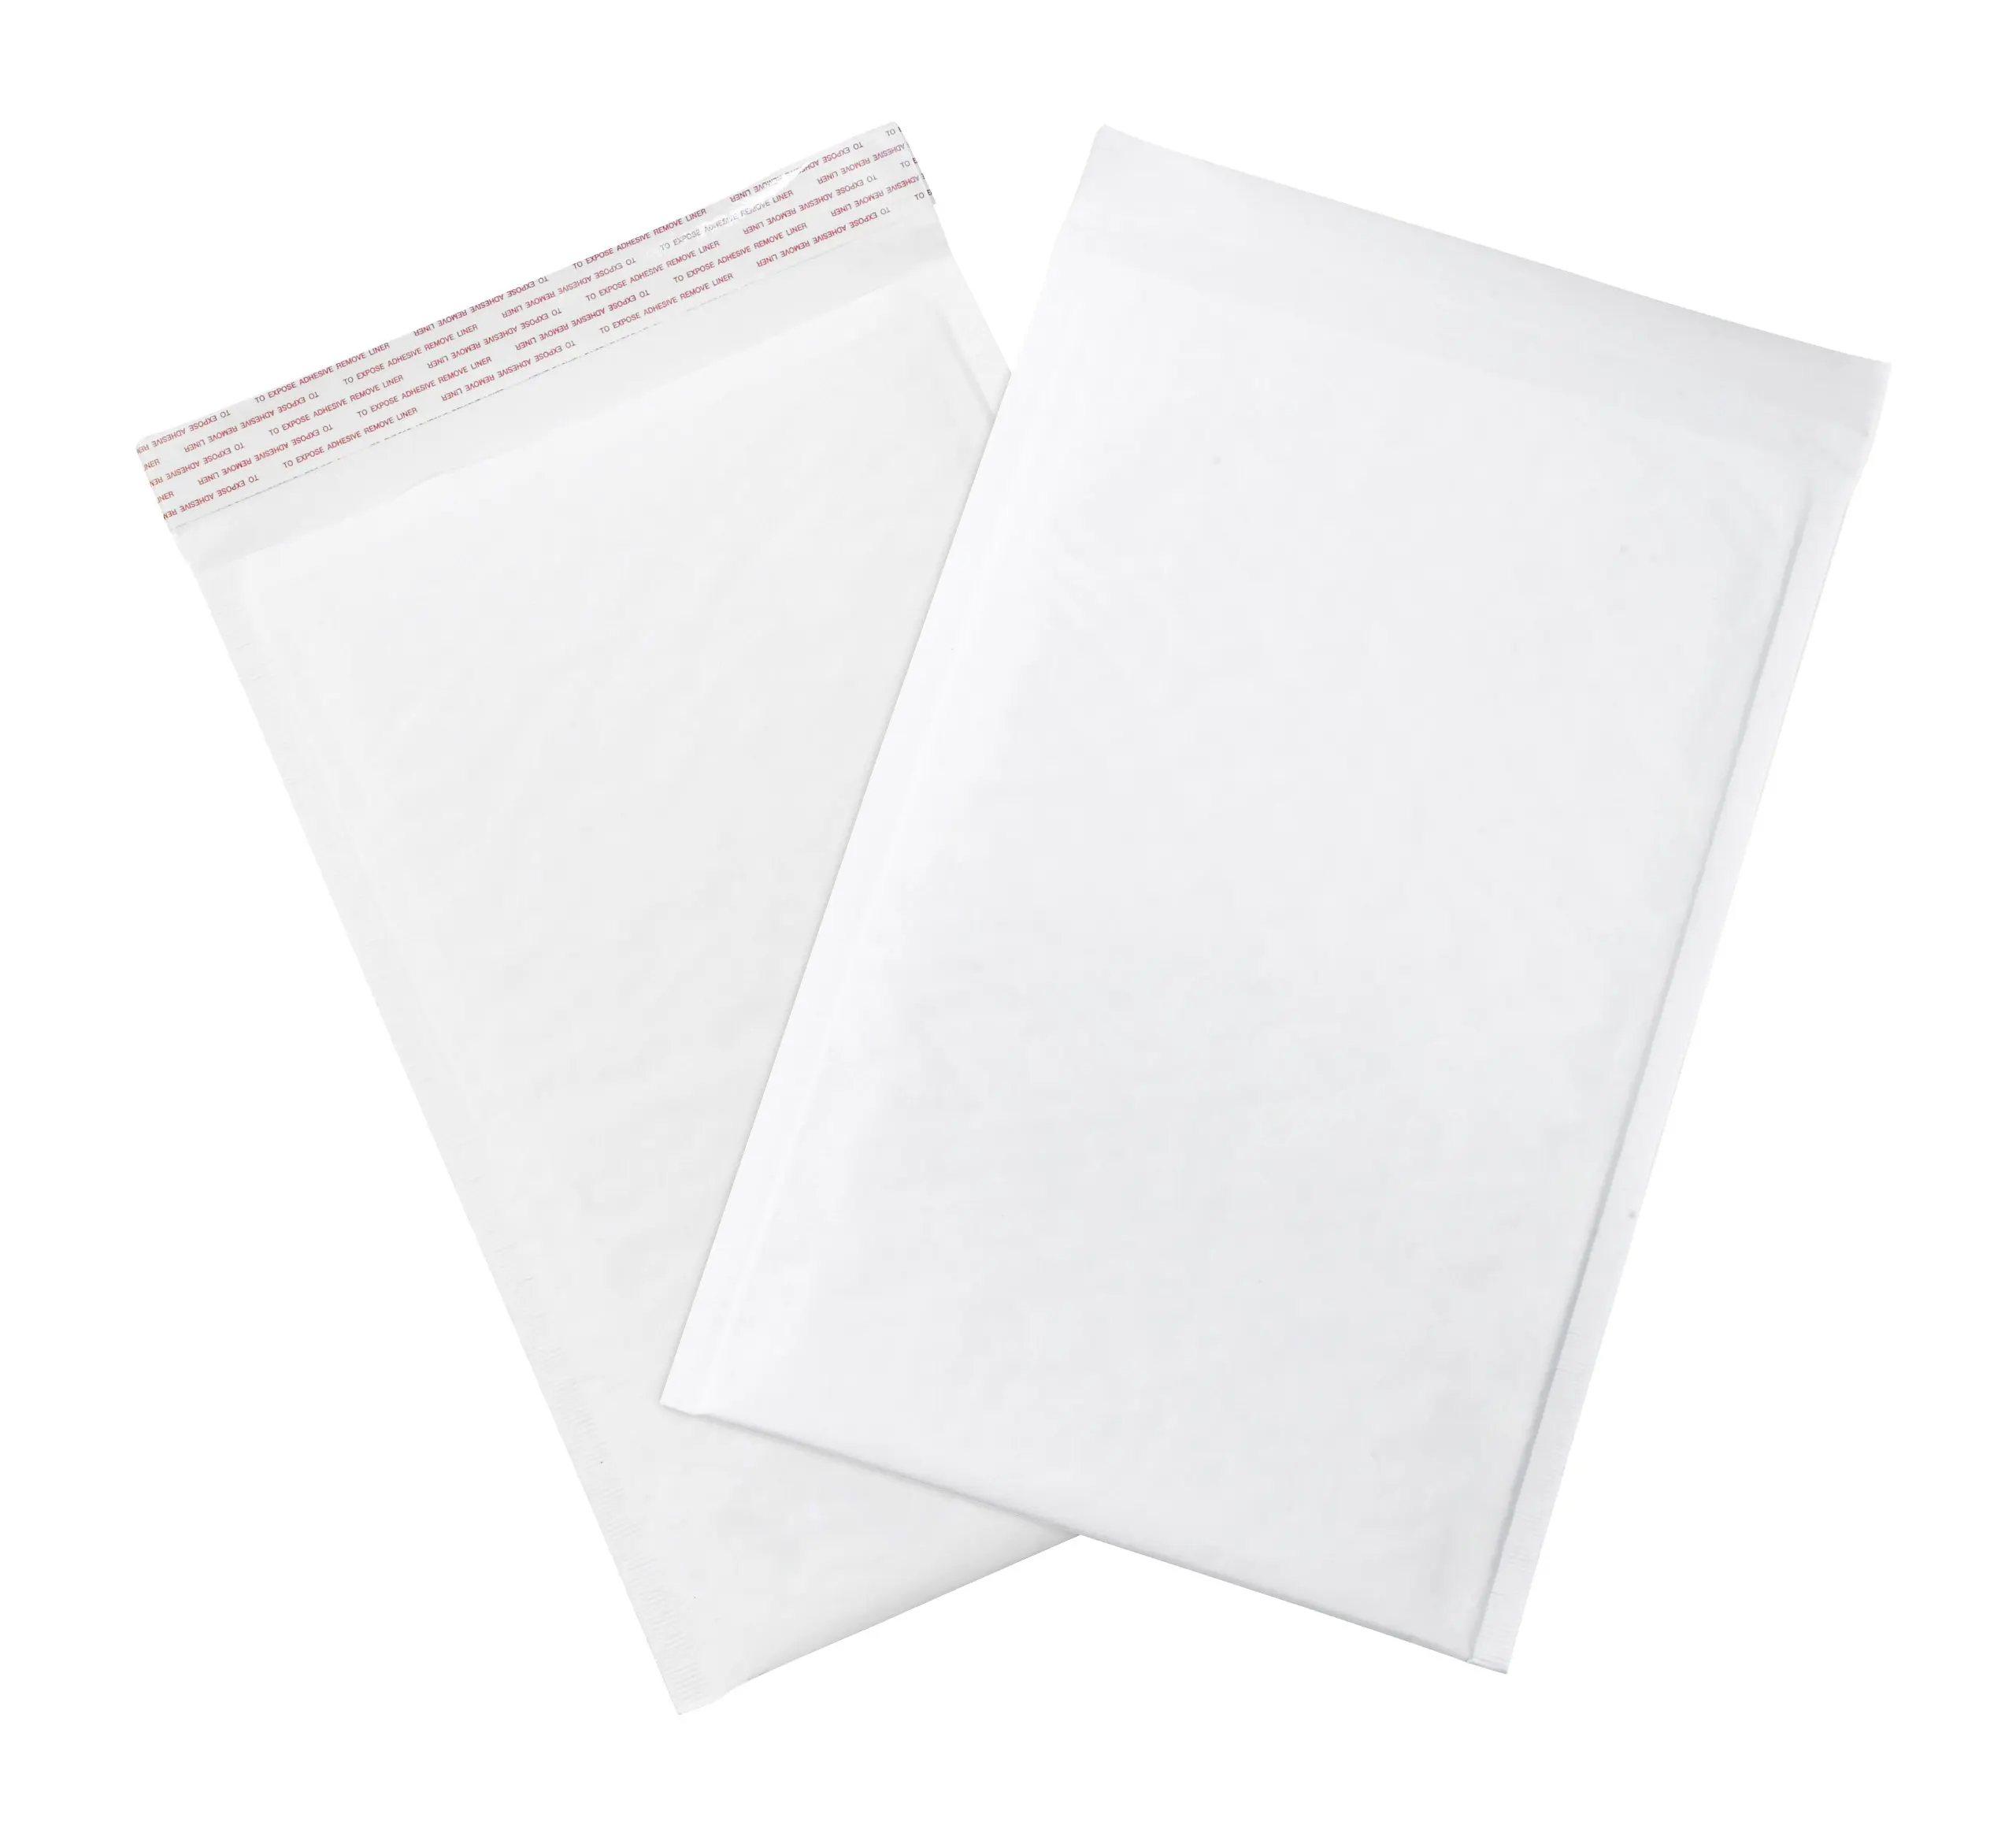 Eco-Friendly Bubble Mailer Shipping Envelopes with Self Adhesive Strip Golden Self-Seal Padded Envelopes HAI-RAAN 000 Kraft Bubble Mailers 4x8 50 Pack